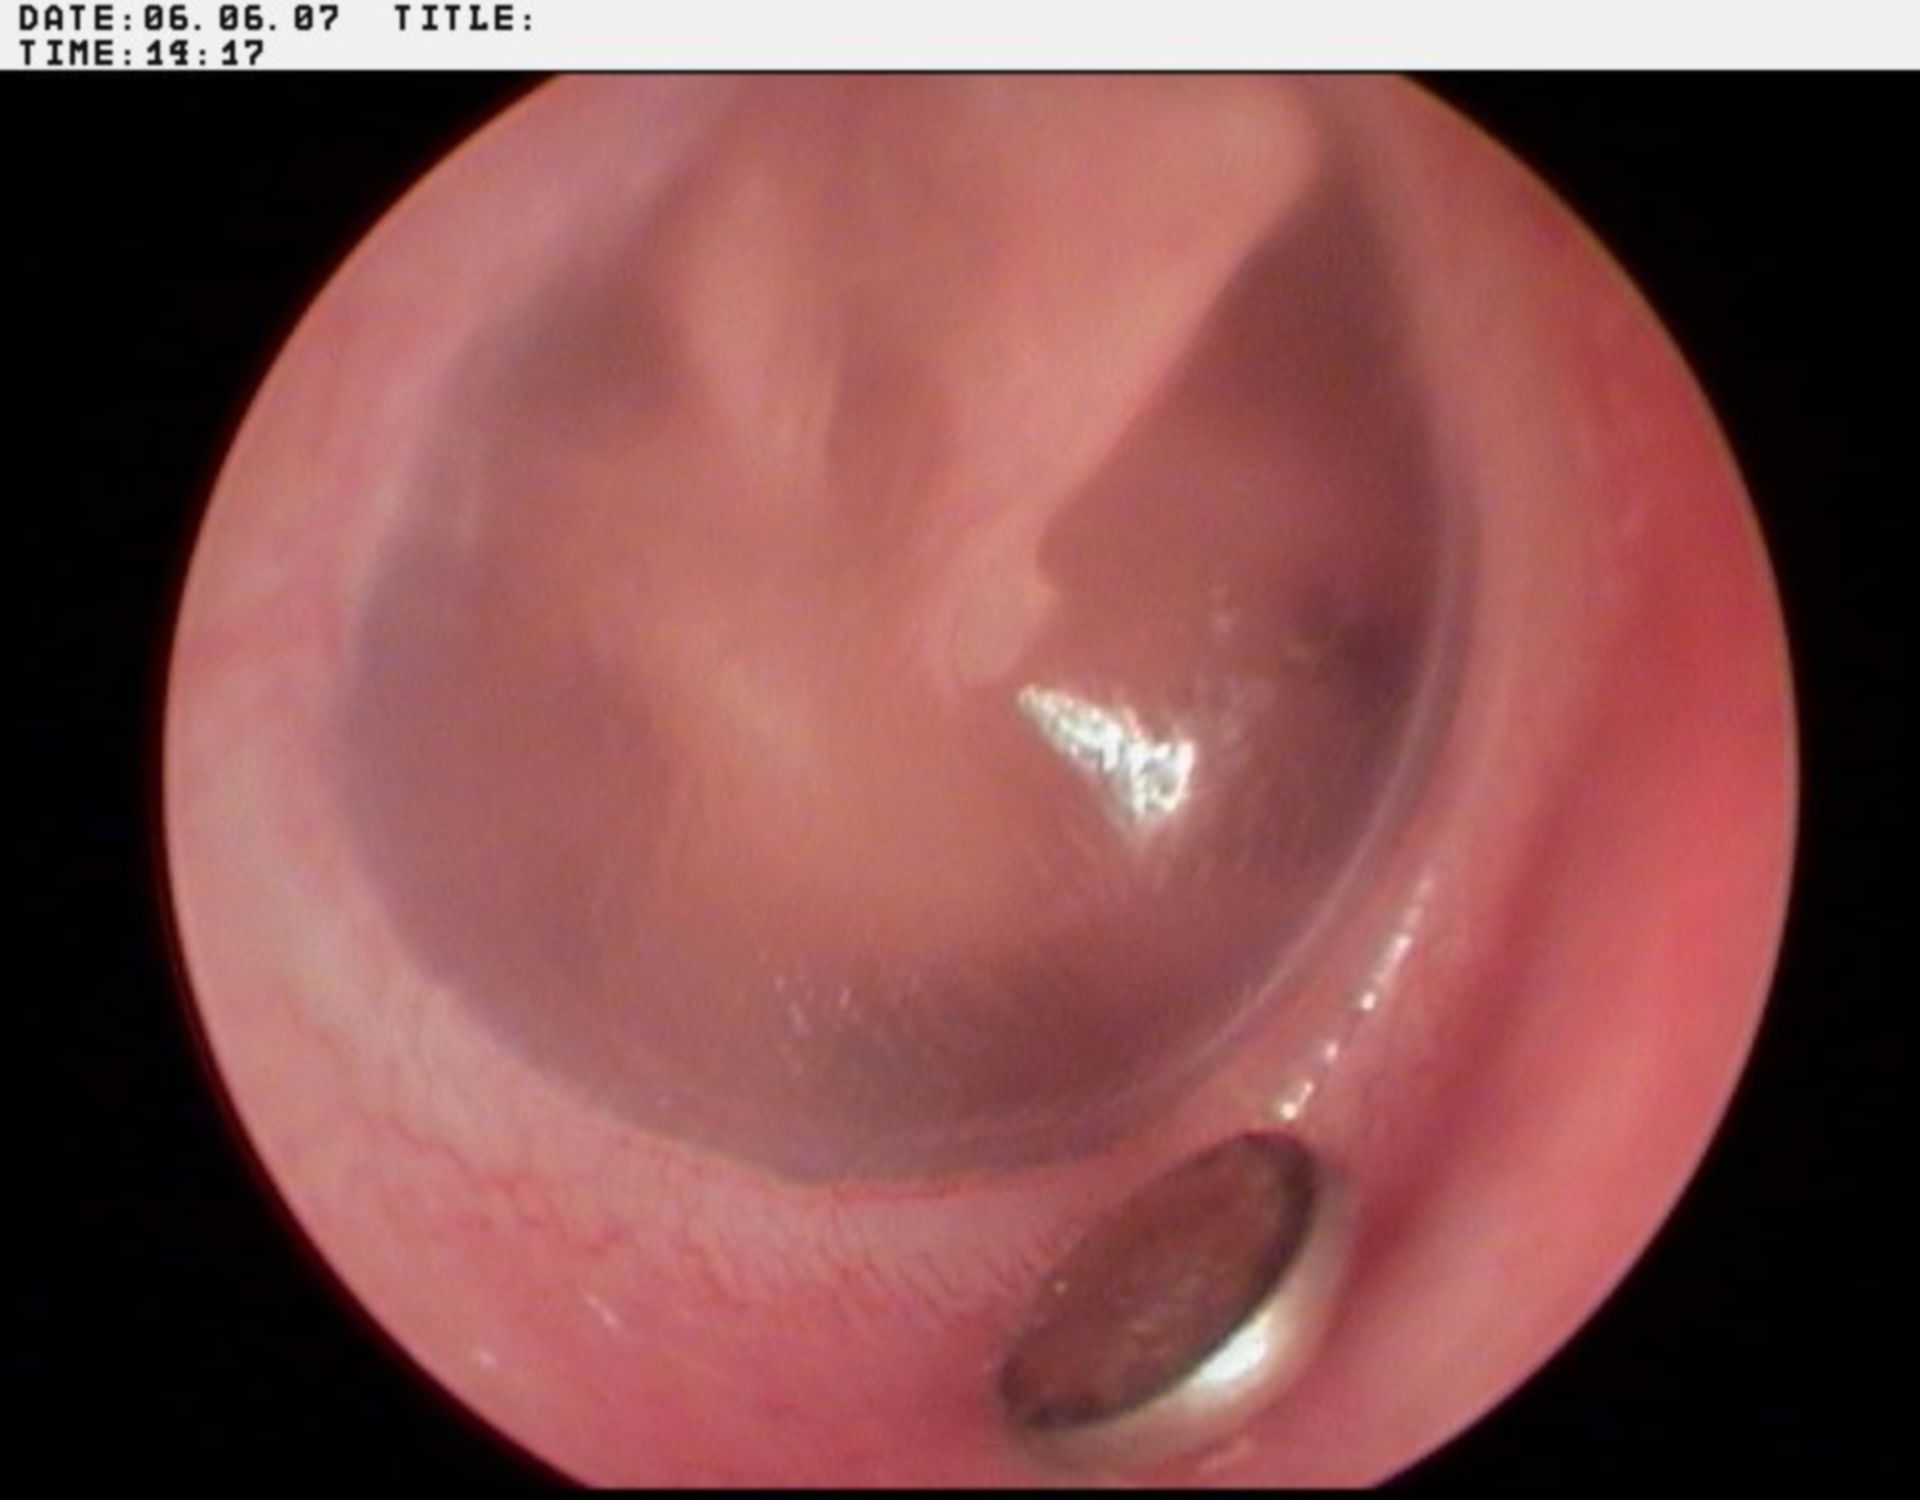 Foreign body in the ear